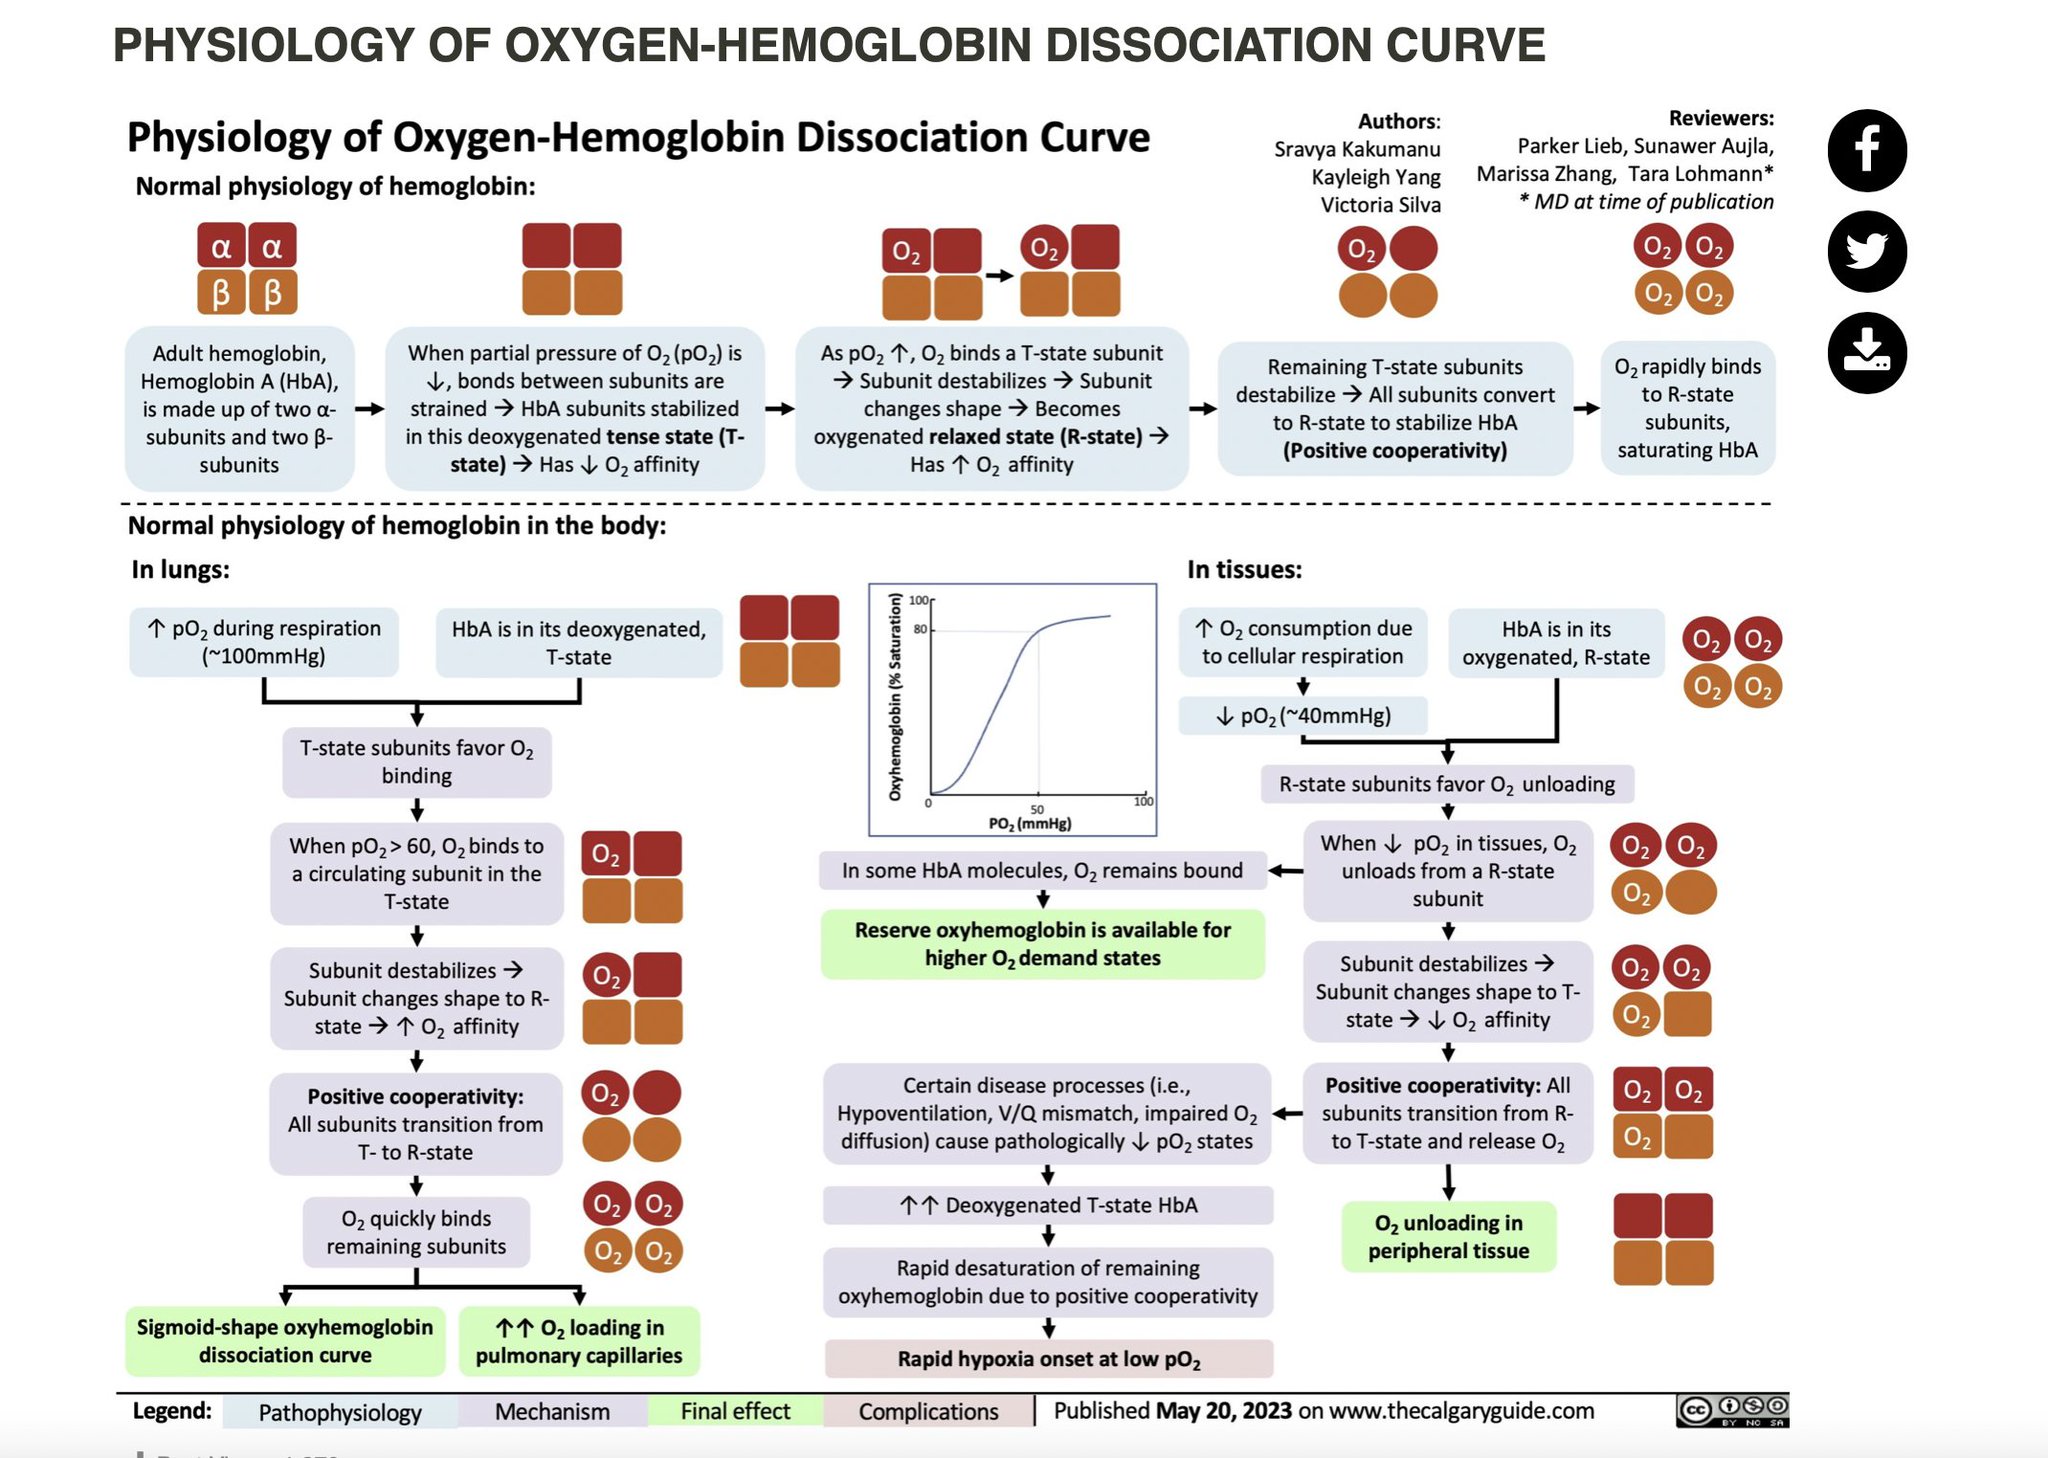 Aaron Goodman - “Papa Heme” on X: Hemoglobin Dissociation Curve! I have to  teach this soon and was reviewing hemoglobin dissociation curve and came  across this fantastic slide from The Calgary Guide